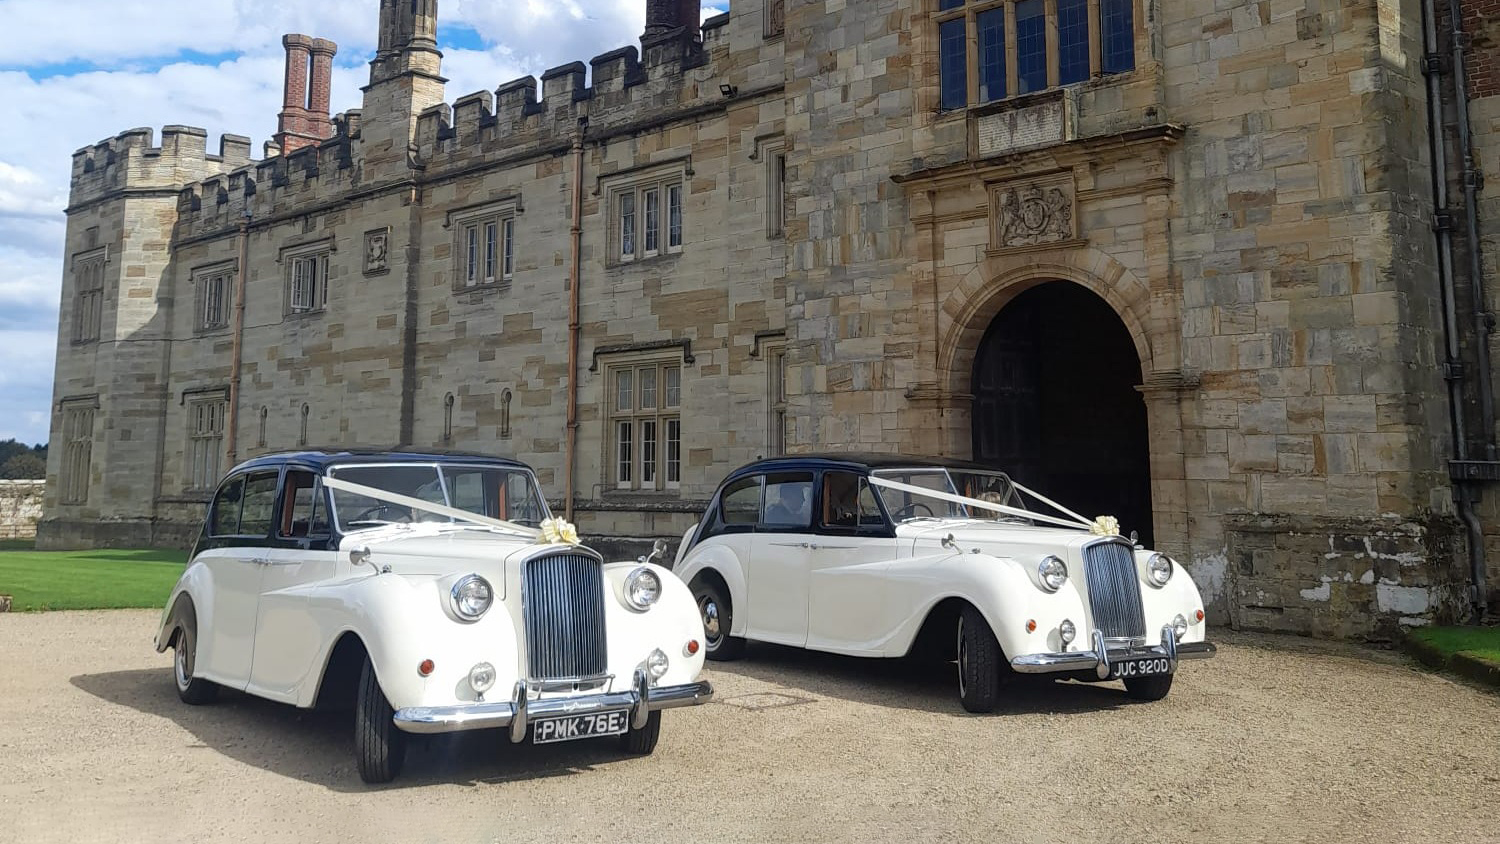 Two Classic Austin Princess Limousine decorated with Ivory Ribbons and Bows on top of the front grill. Vehicles are parked in front of a large manor house in Herne Bay